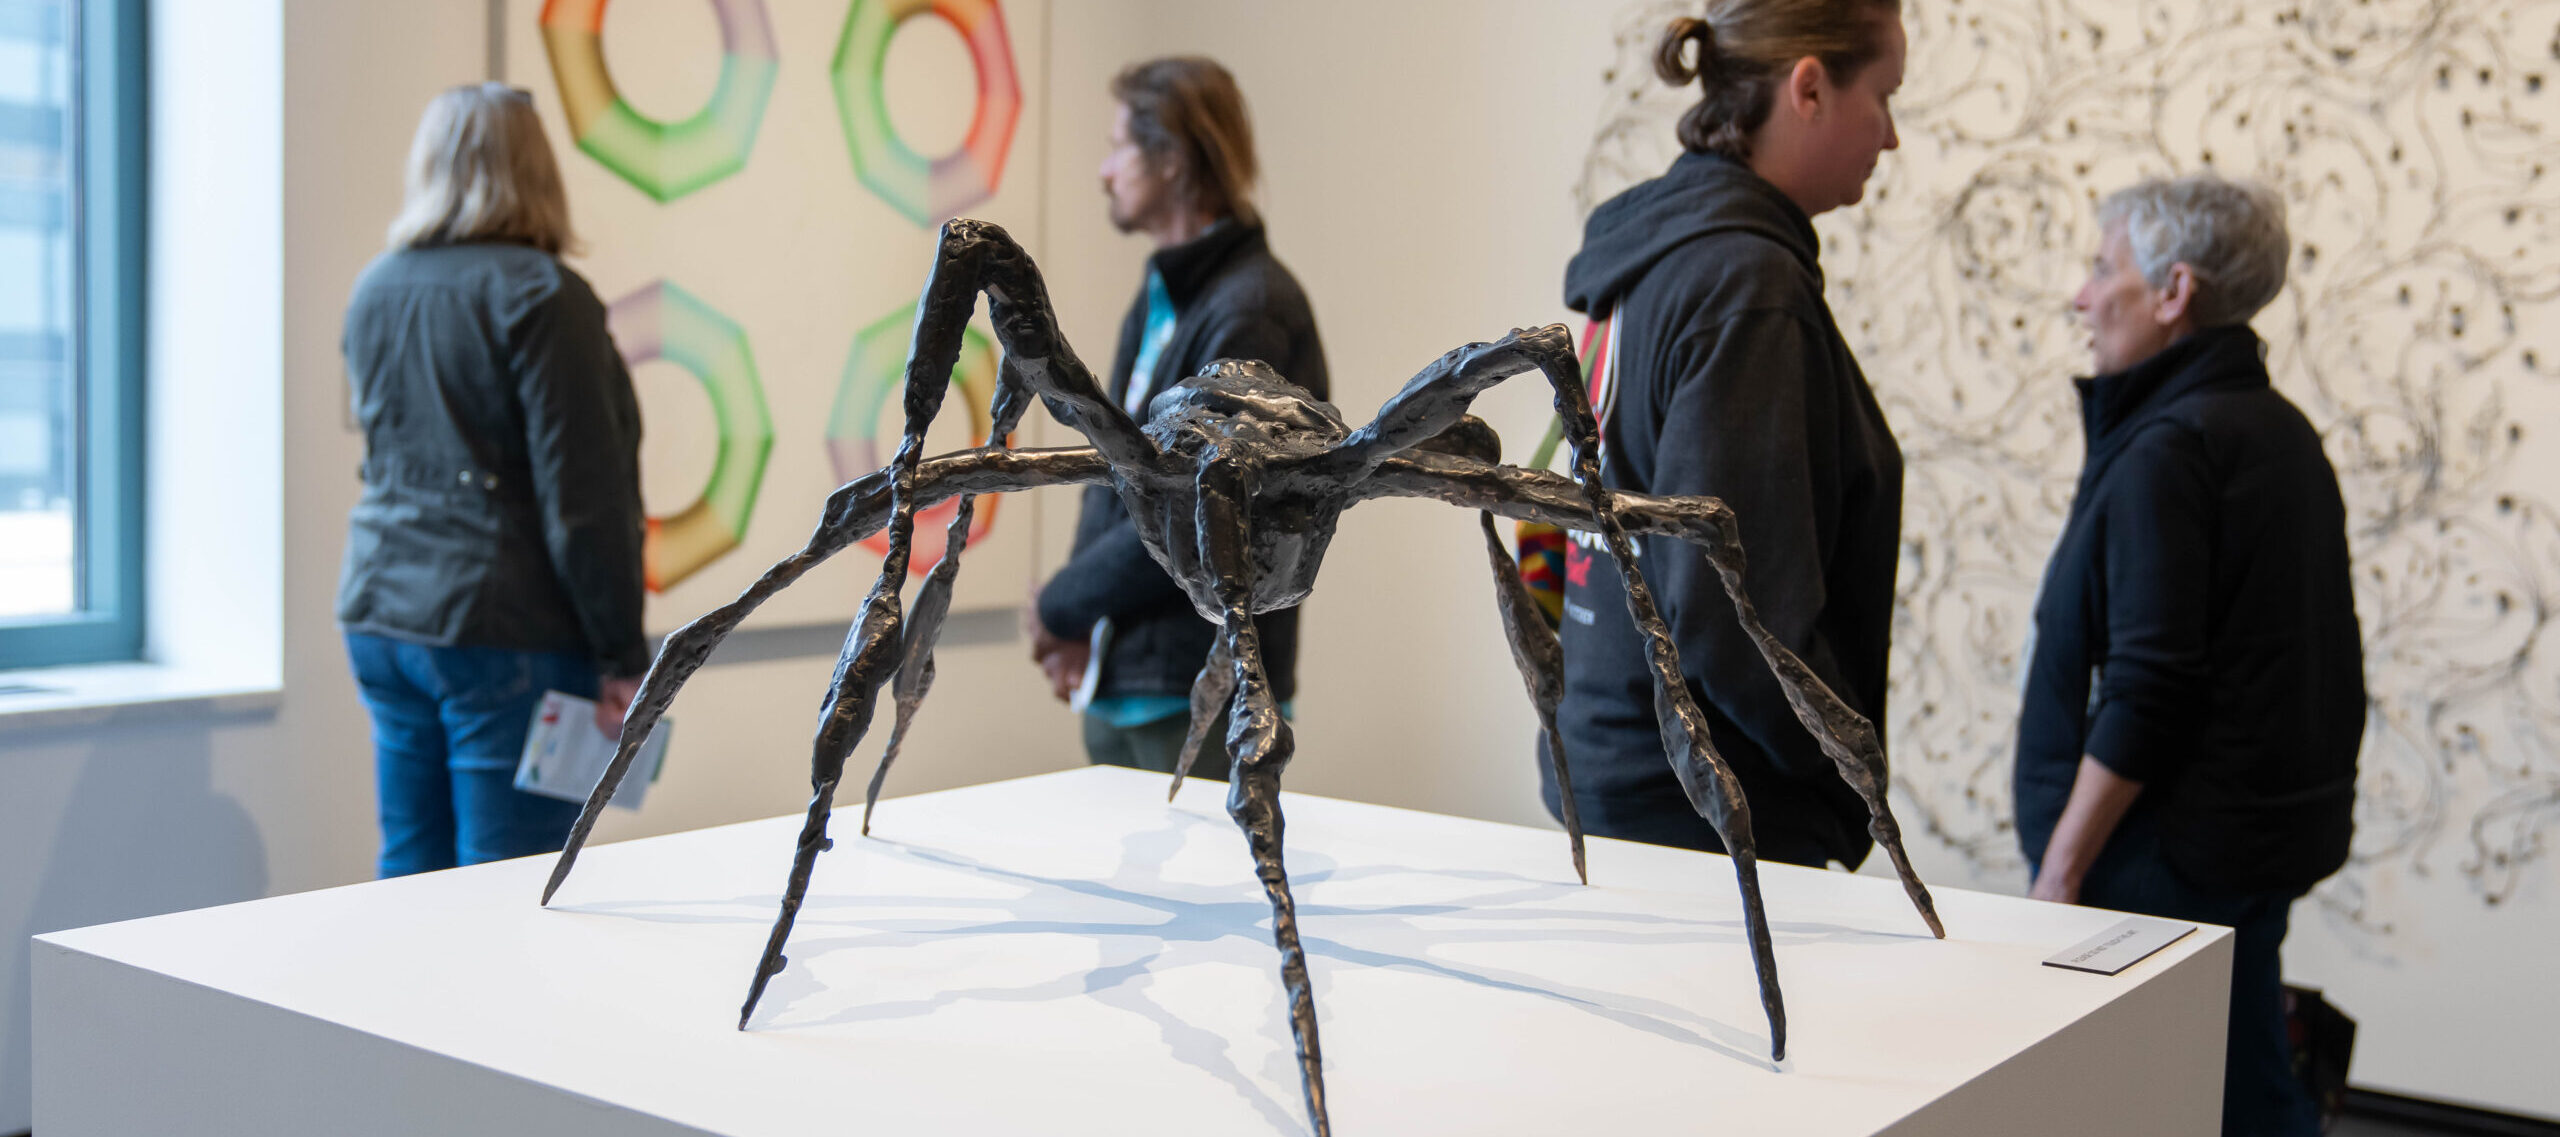 A bronze sculpture of a spider with arched, spindly legs sits on a white pedestal in a museum gallery. In the background, museum visitors observe artworks on the walls.